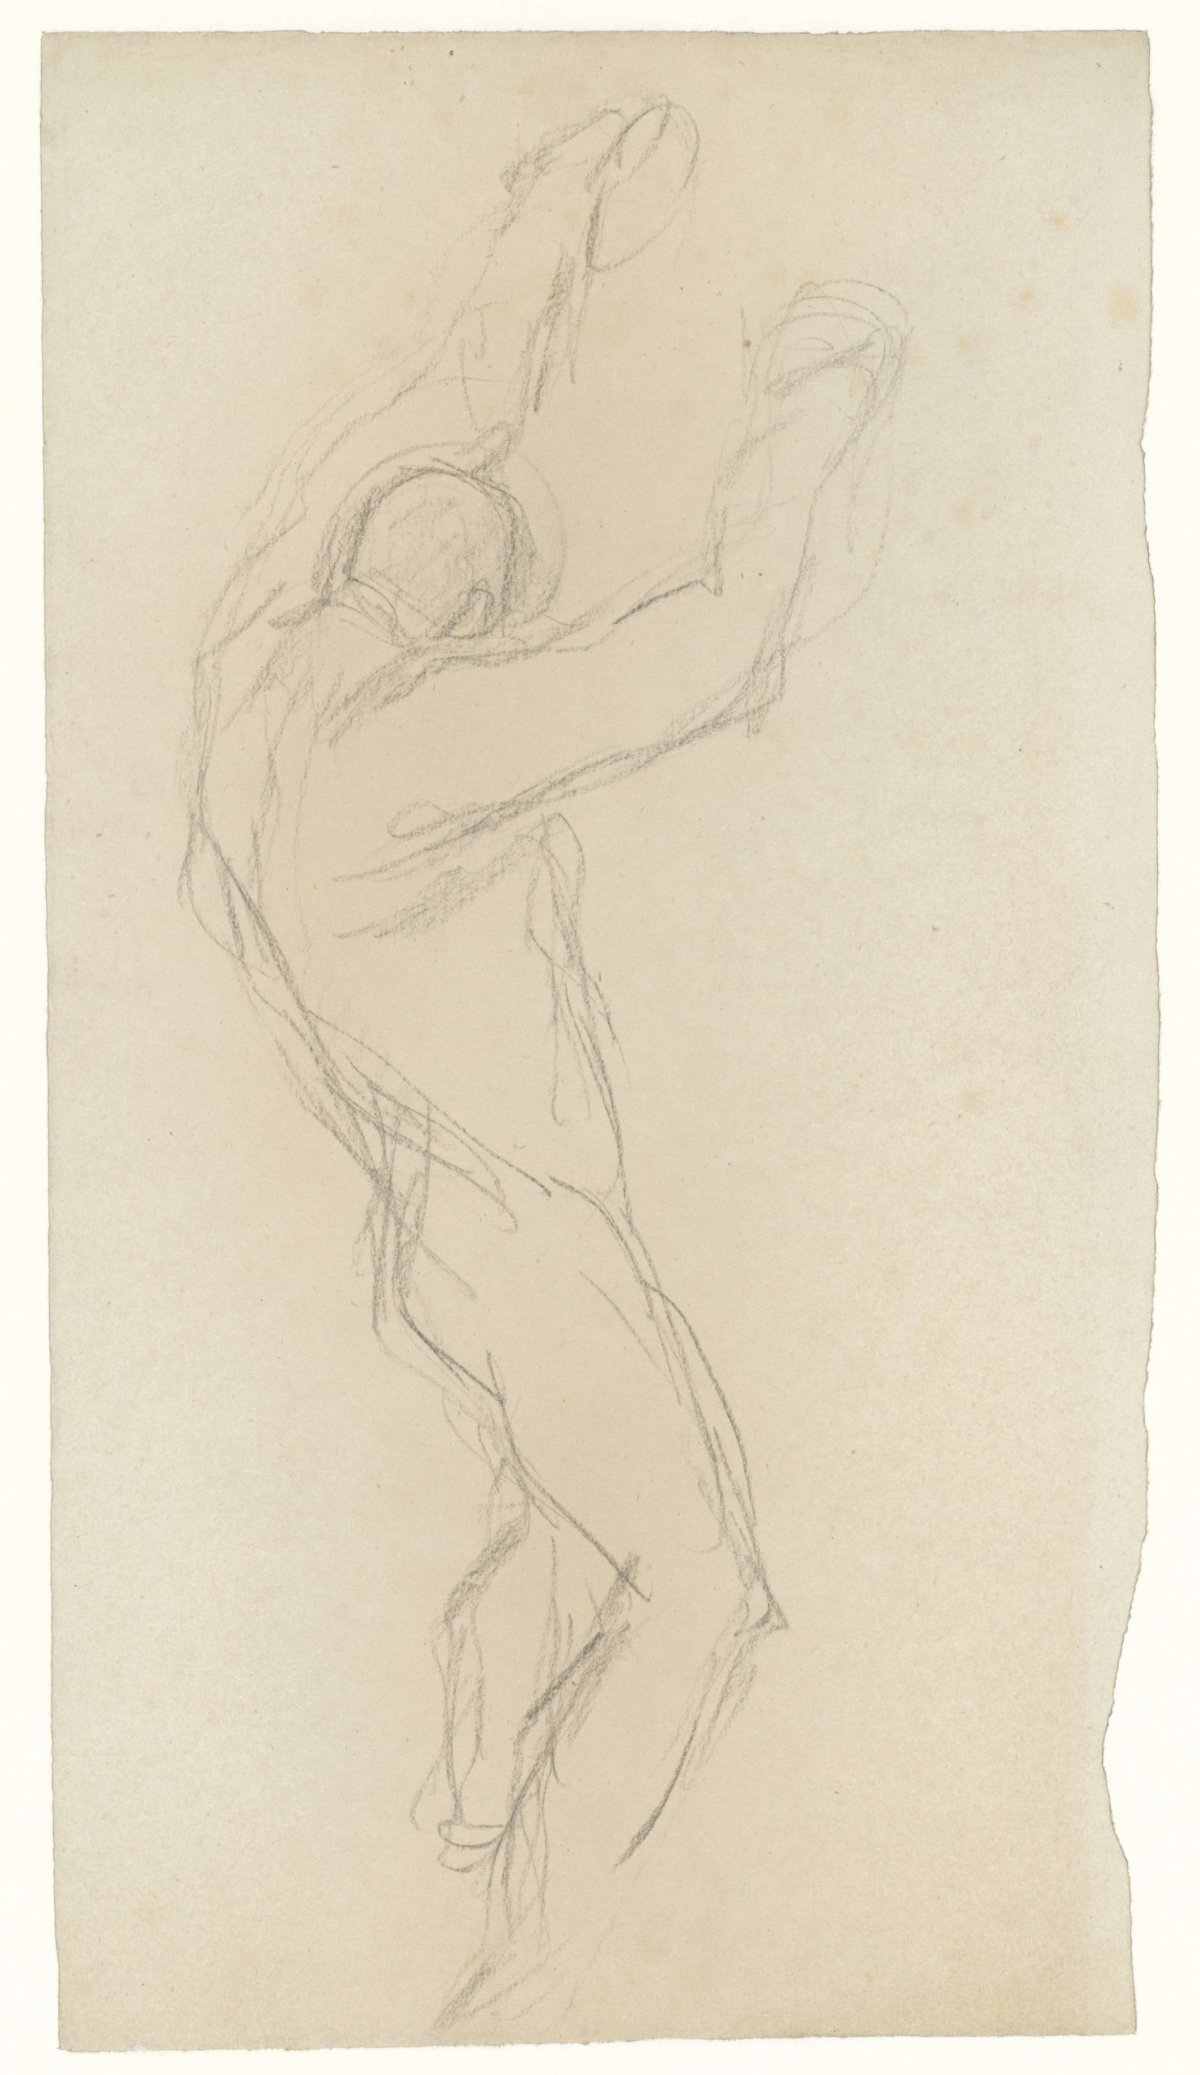 Dancing figure, to the right, Matthijs Maris, 1849 - 1917